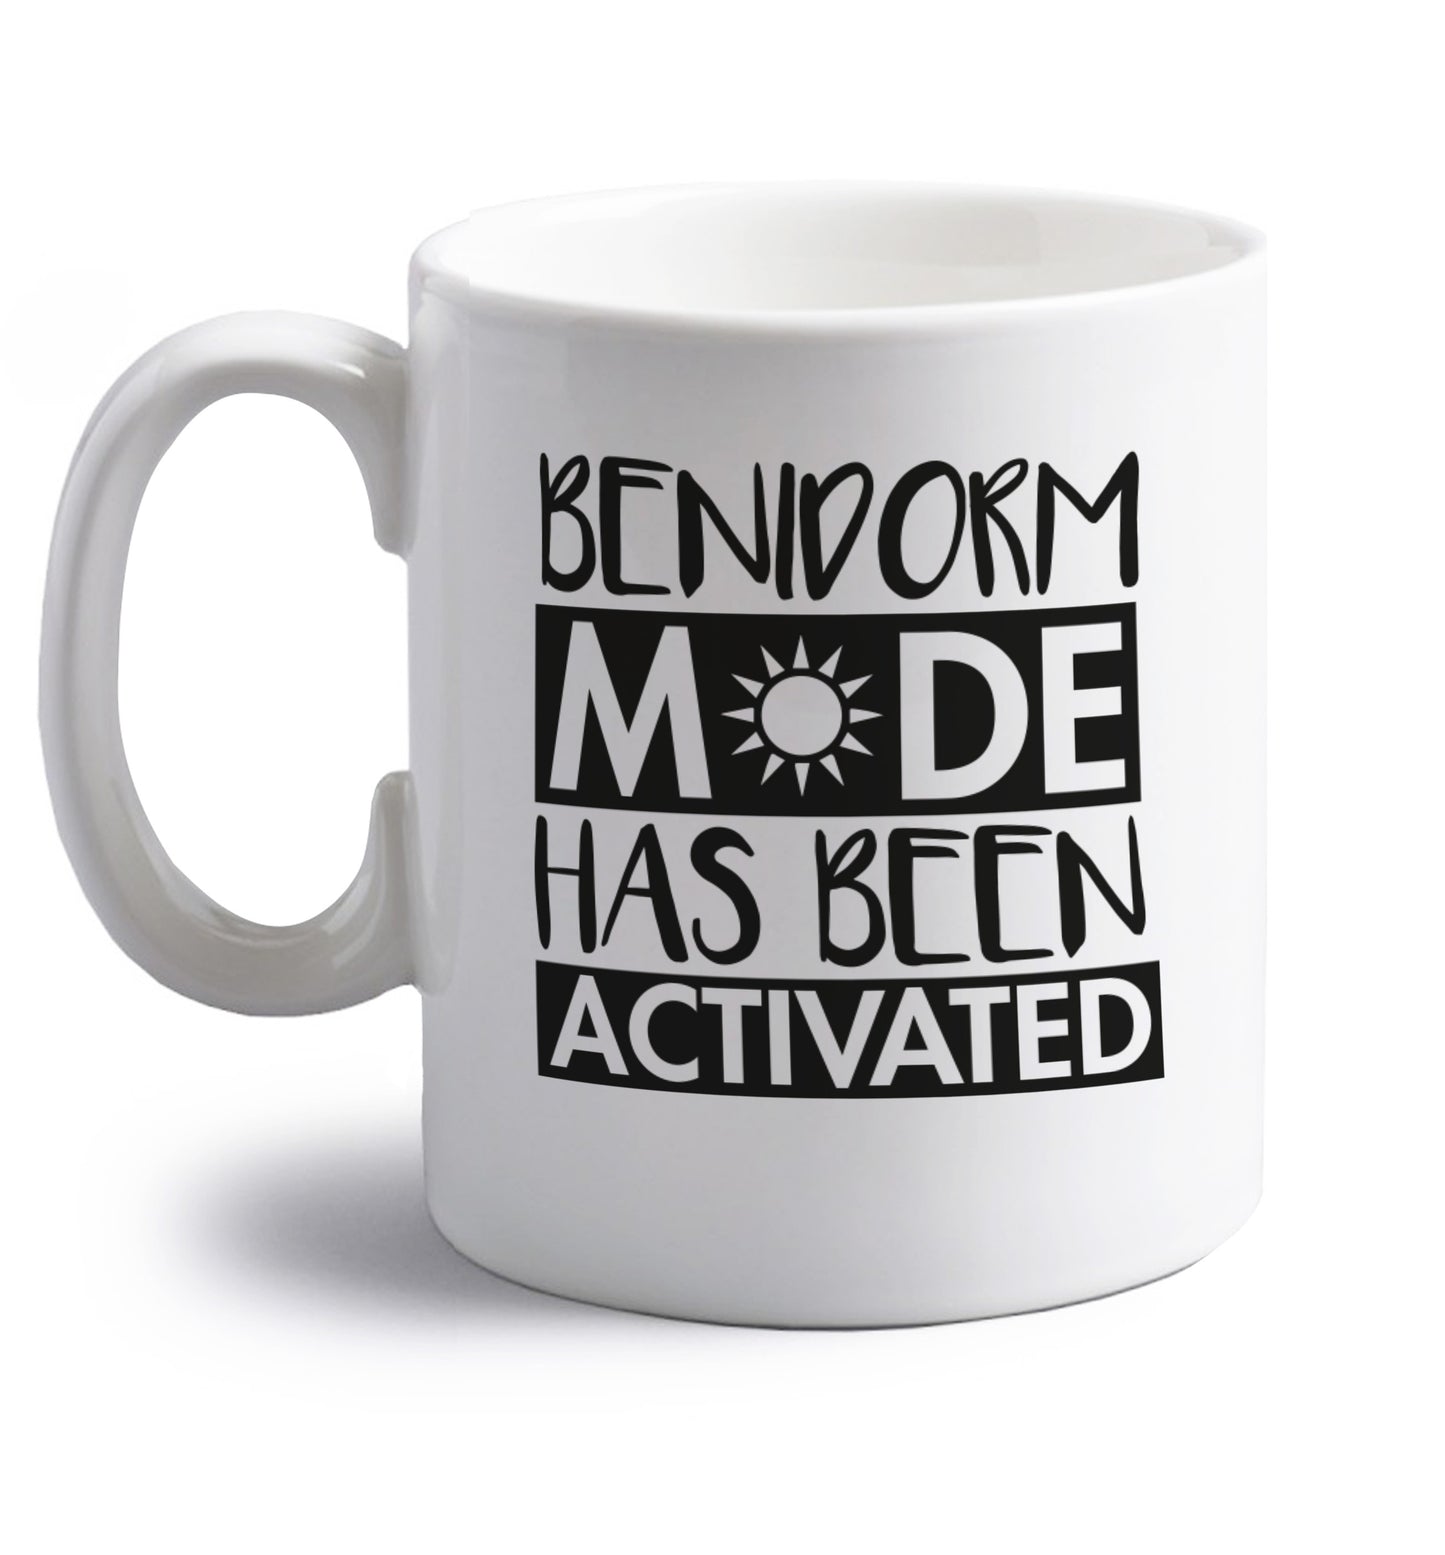 Benidorm mode has been activated right handed white ceramic mug 